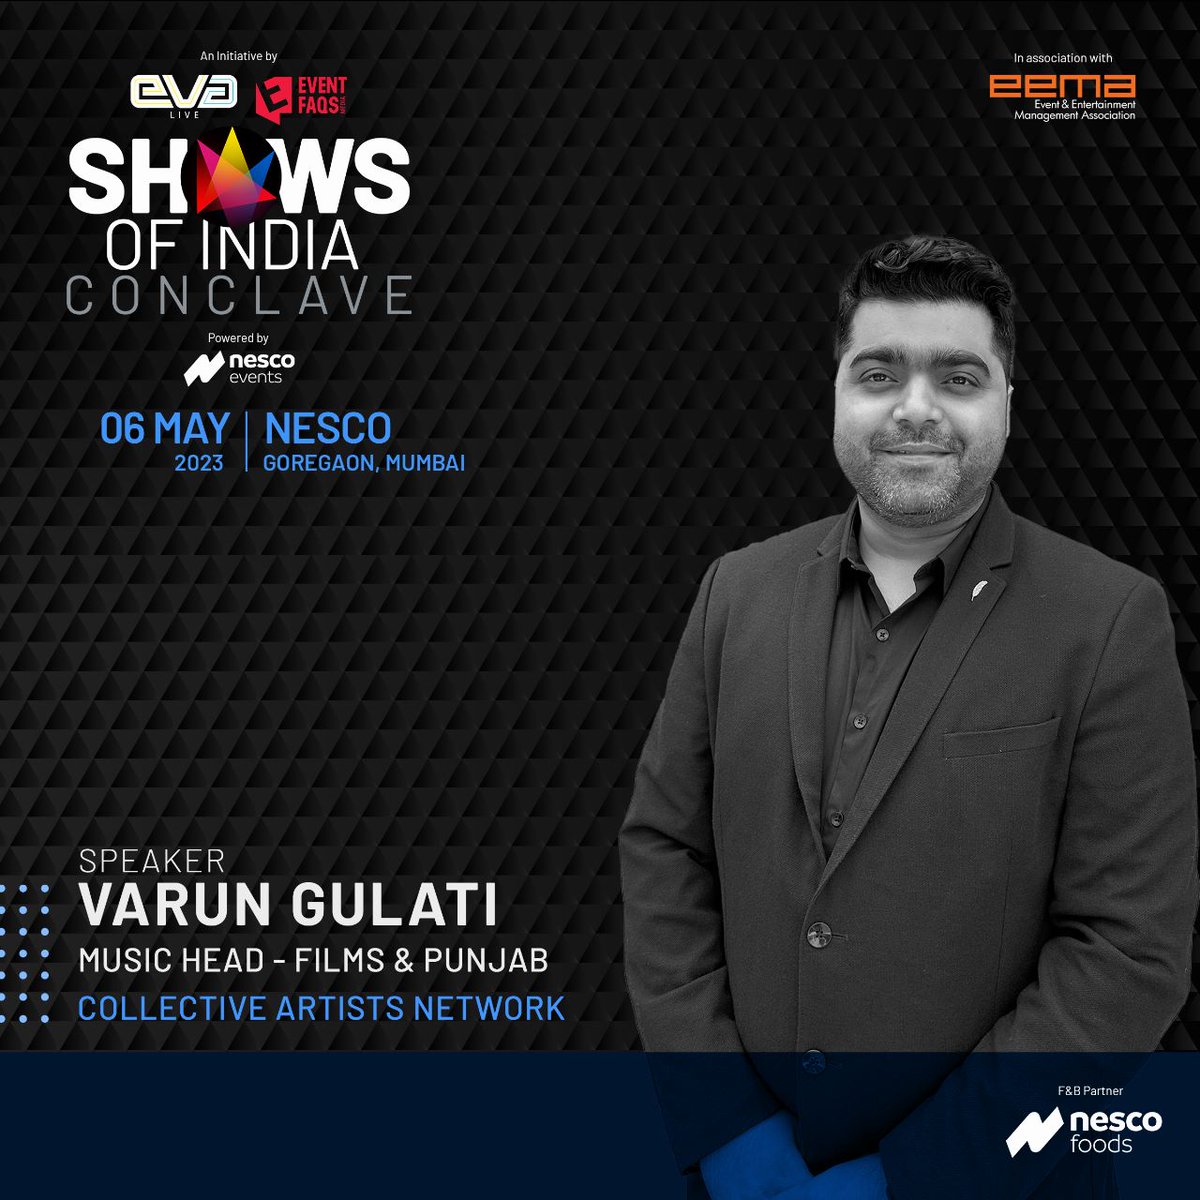 We’re are excited to announce Varun Gulati, Music – Head Films & Punjab, Collective Artist Network to the #ShowsOfindia. Varun worked with DCA & Exceed Entertainment as a Music- Head.